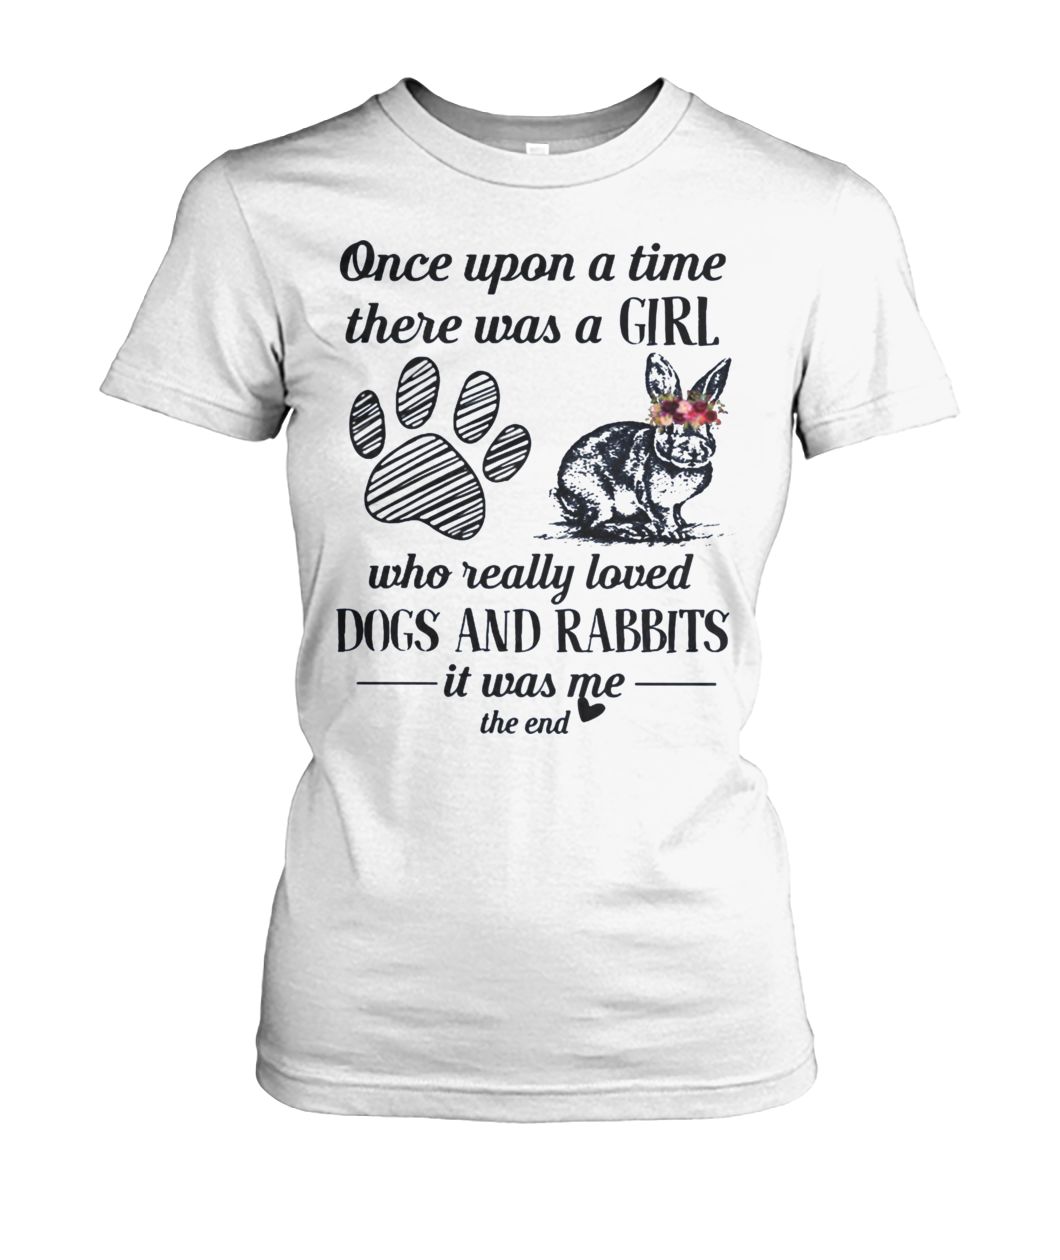 Once upon a time there was a girl who really loved dogs and rabbit it was me the end women's crew tee